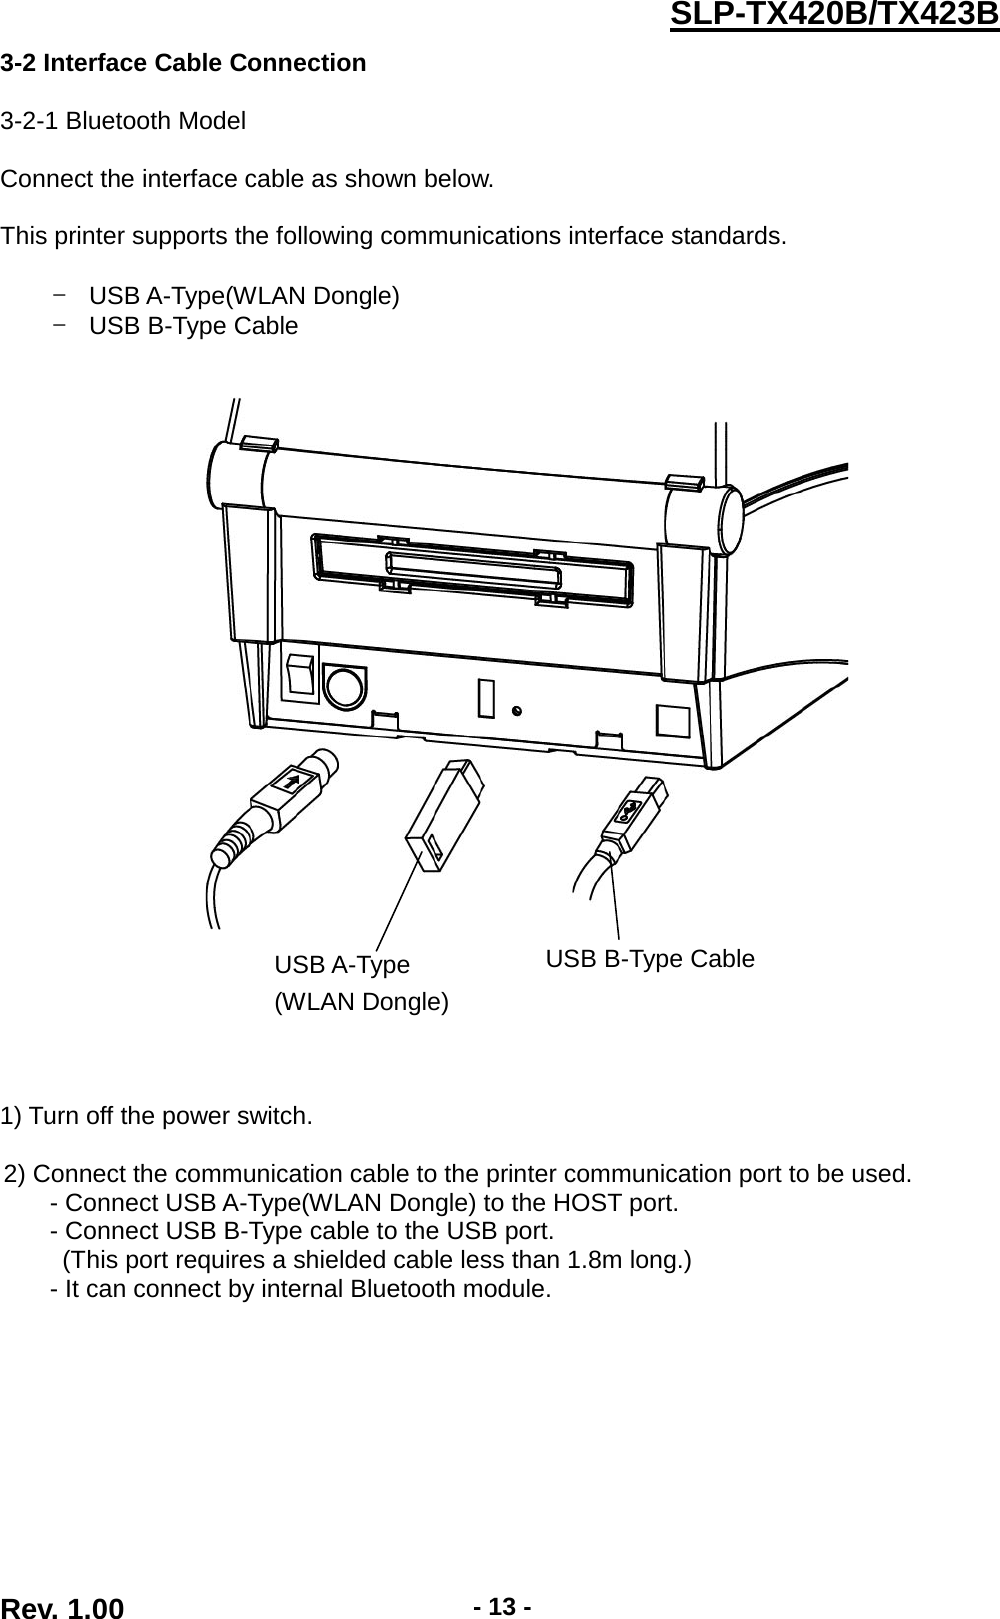  Rev. 1.00 - 13 - SLP-TX420B/TX423B 3-2 Interface Cable Connection  3-2-1 Bluetooth Model  Connect the interface cable as shown below.  This printer supports the following communications interface standards.  - USB A-Type(WLAN Dongle) - USB B-Type Cable                 1) Turn off the power switch.  2) Connect the communication cable to the printer communication port to be used. - Connect USB A-Type(WLAN Dongle) to the HOST port. - Connect USB B-Type cable to the USB port. (This port requires a shielded cable less than 1.8m long.) - It can connect by internal Bluetooth module.      USB B-Type Cable  USB A-Type (WLAN Dongle)  